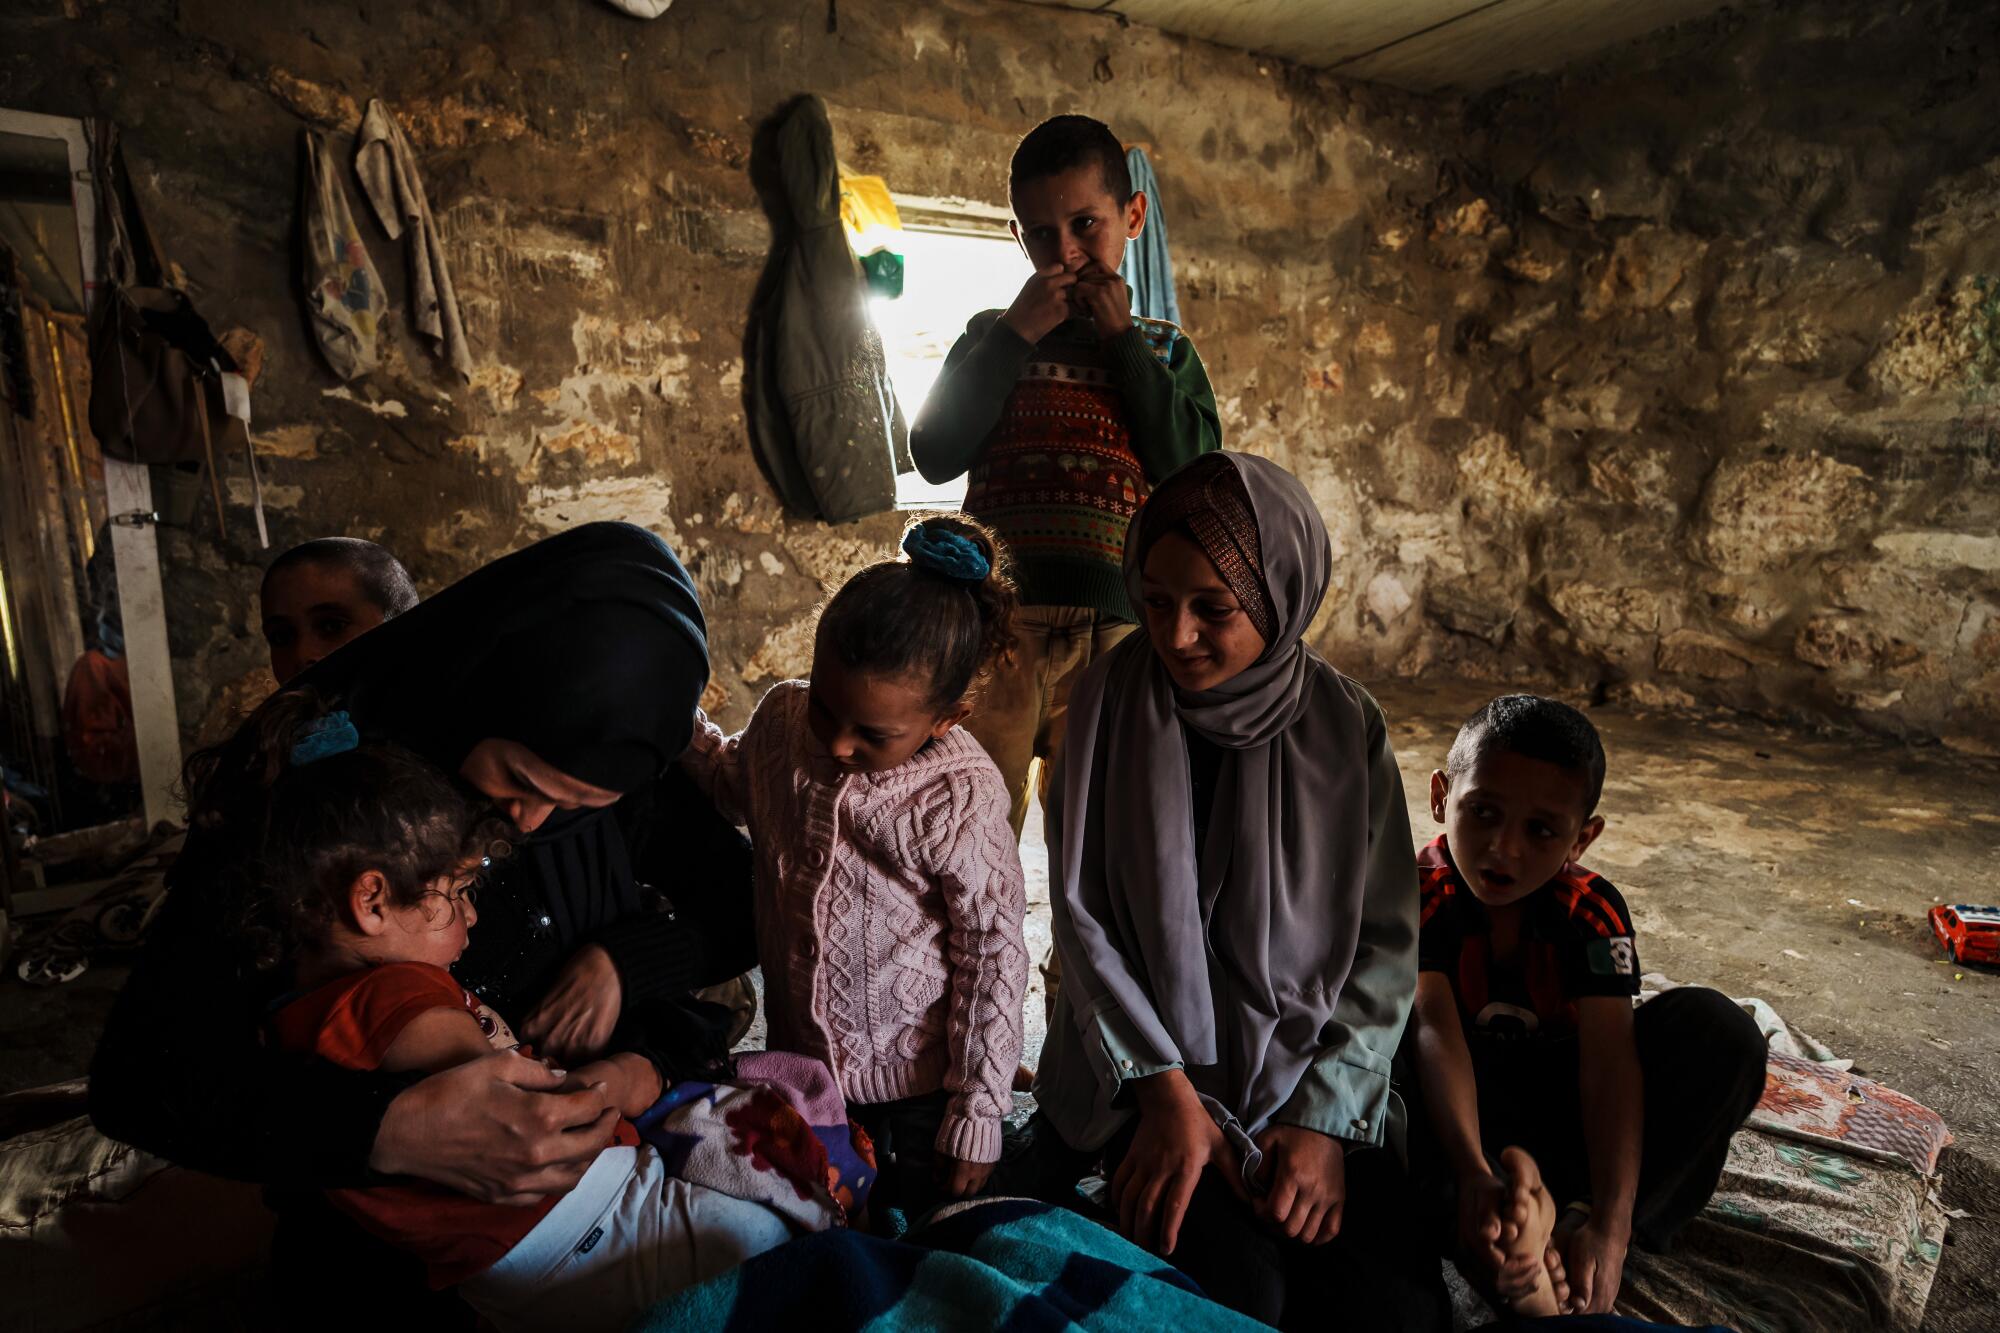 Iman Jabarin checks on her children as they stay at home with her, on close watch for Israeli settlers.